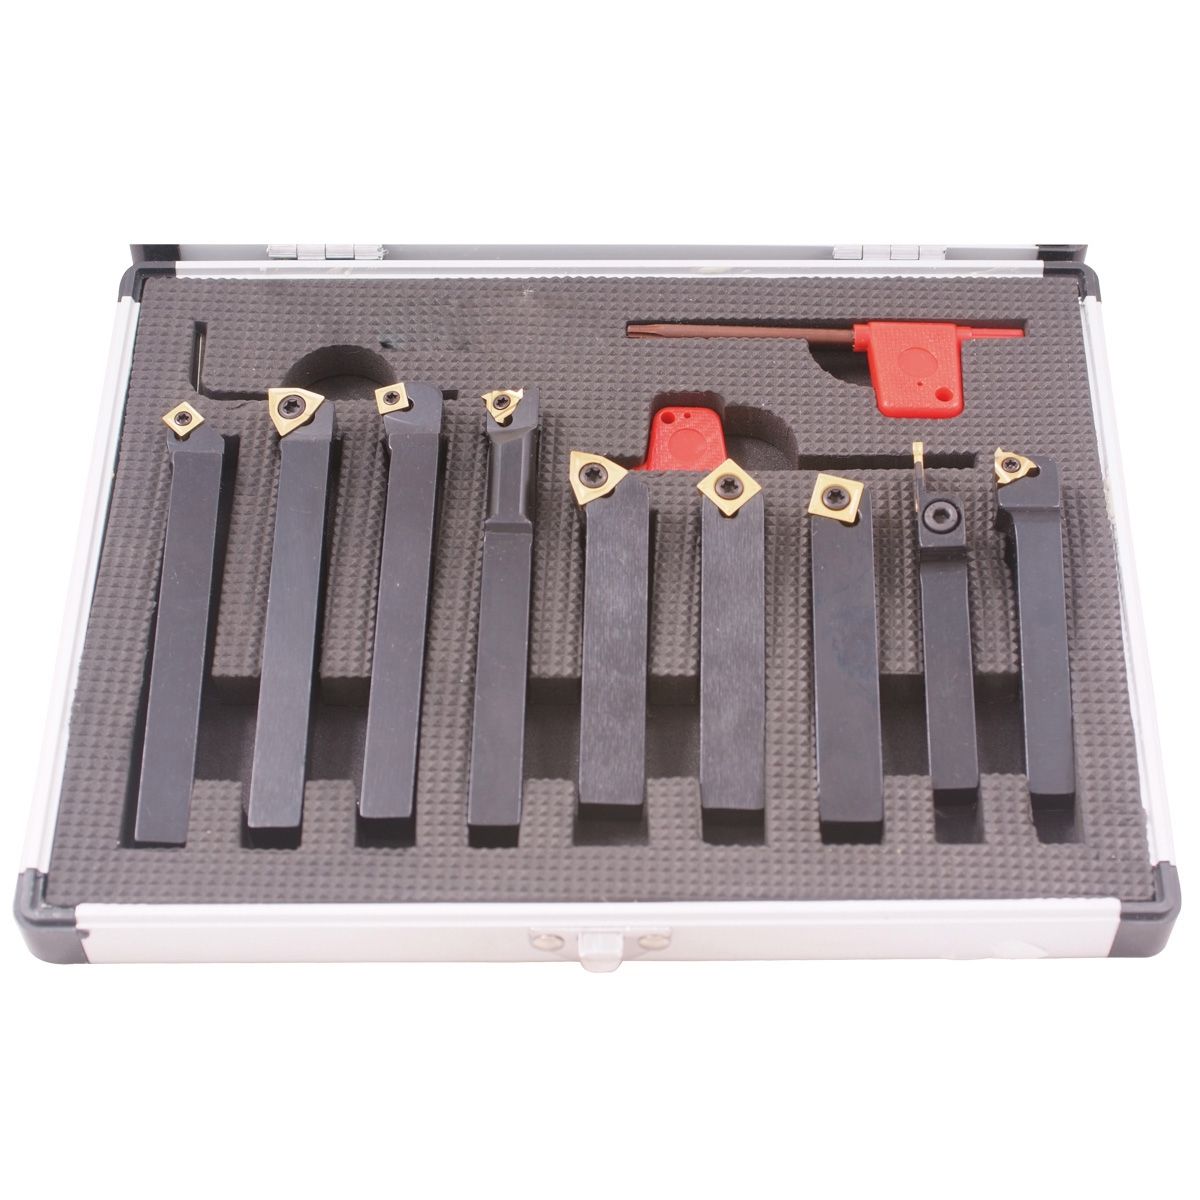 PRO-SERIES 9 PIECE 3/8" INDEXABLE CUT OFF & TURNING TOOL SET (2002-0212)